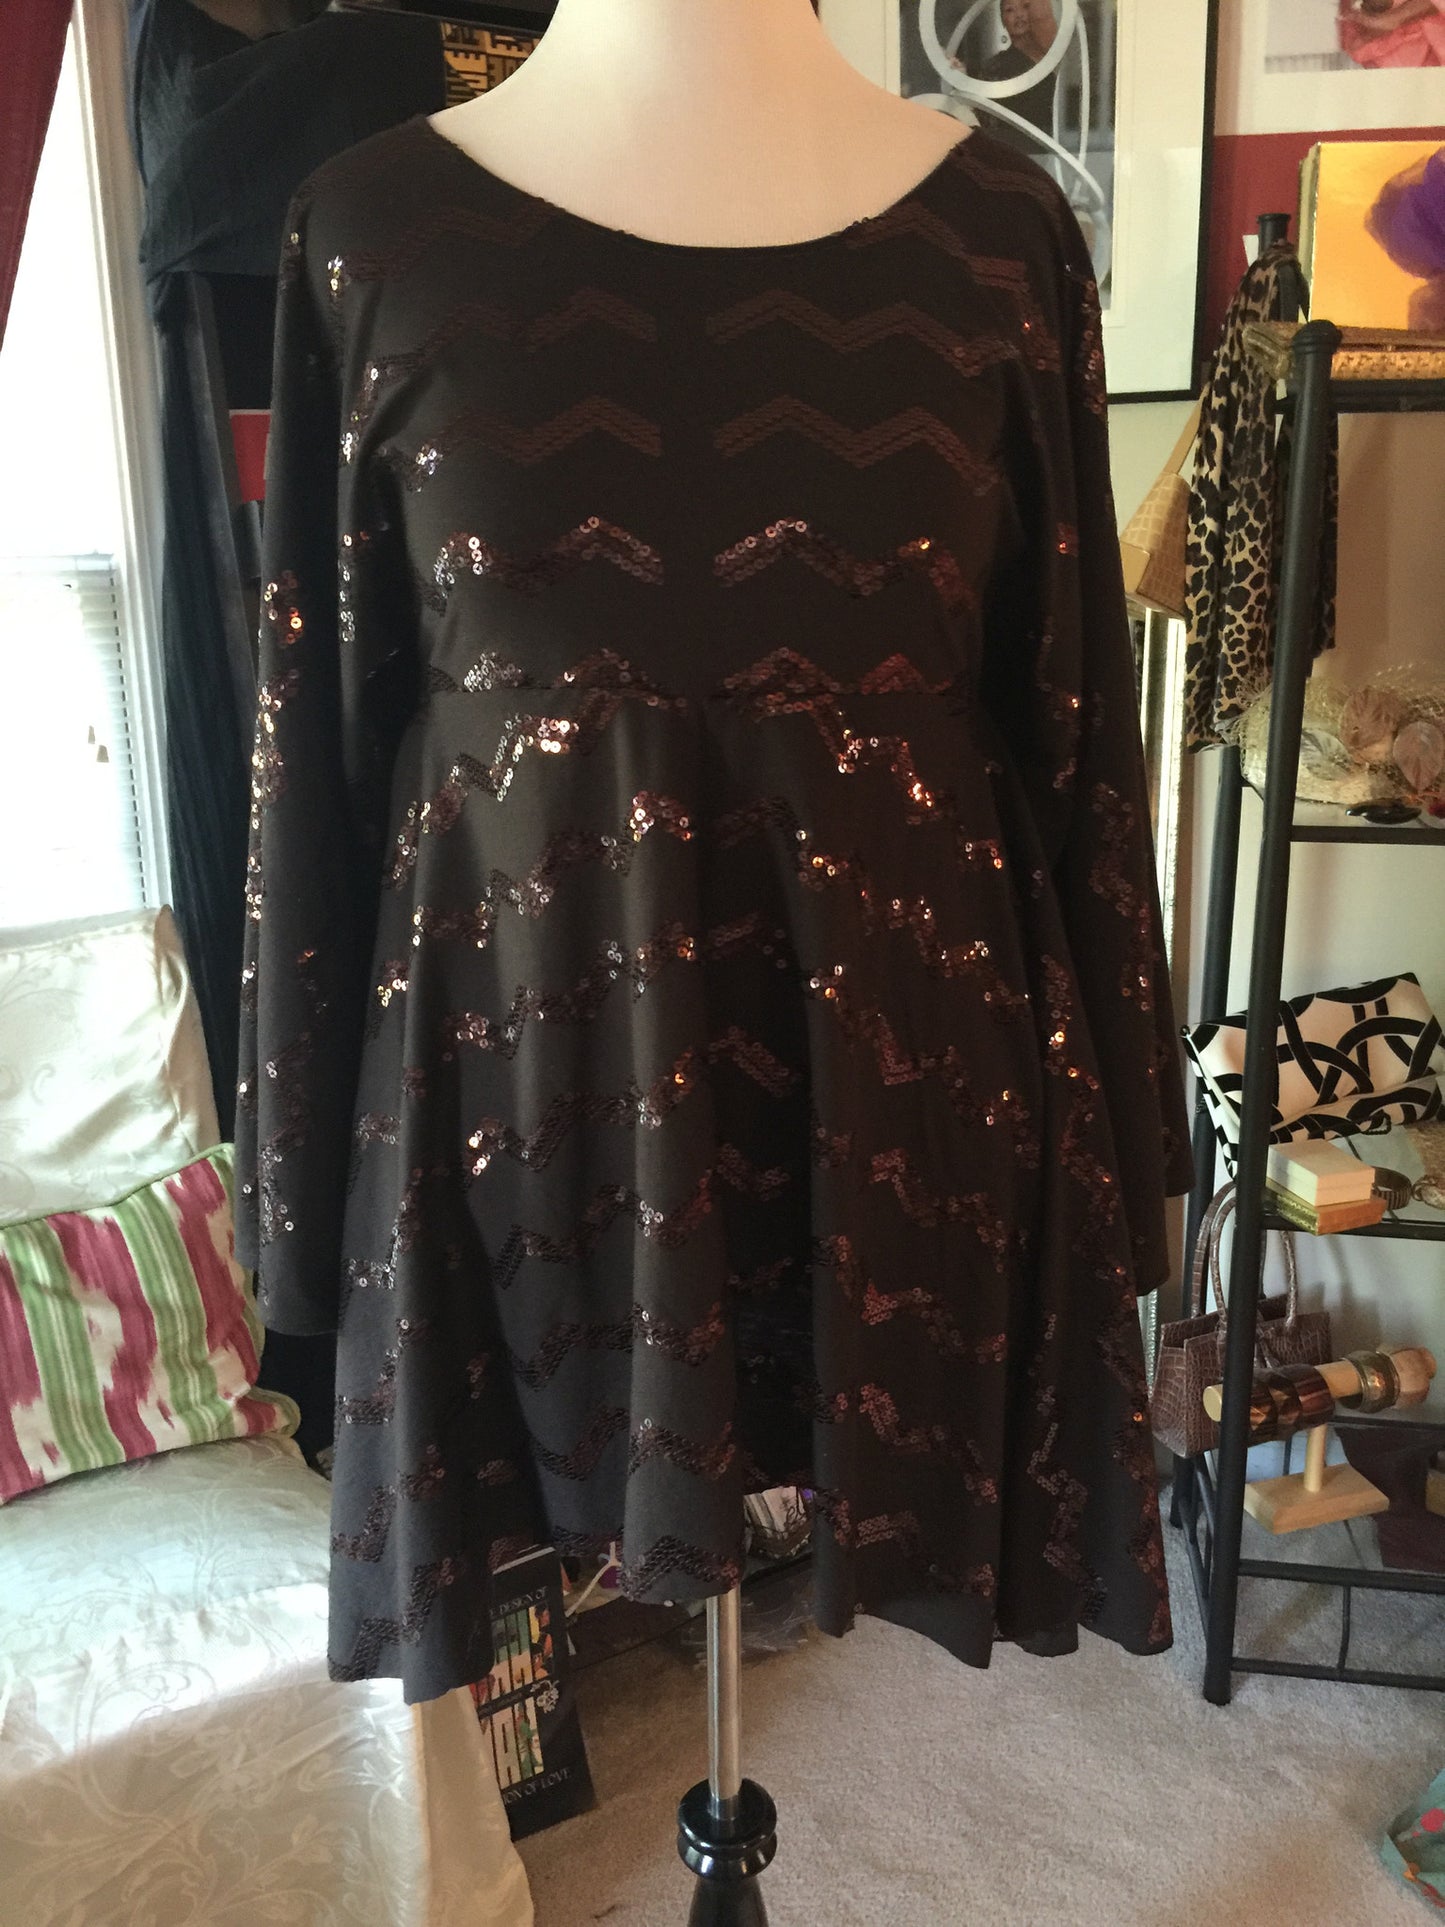 NK Chocolate Knit and Sequin Top